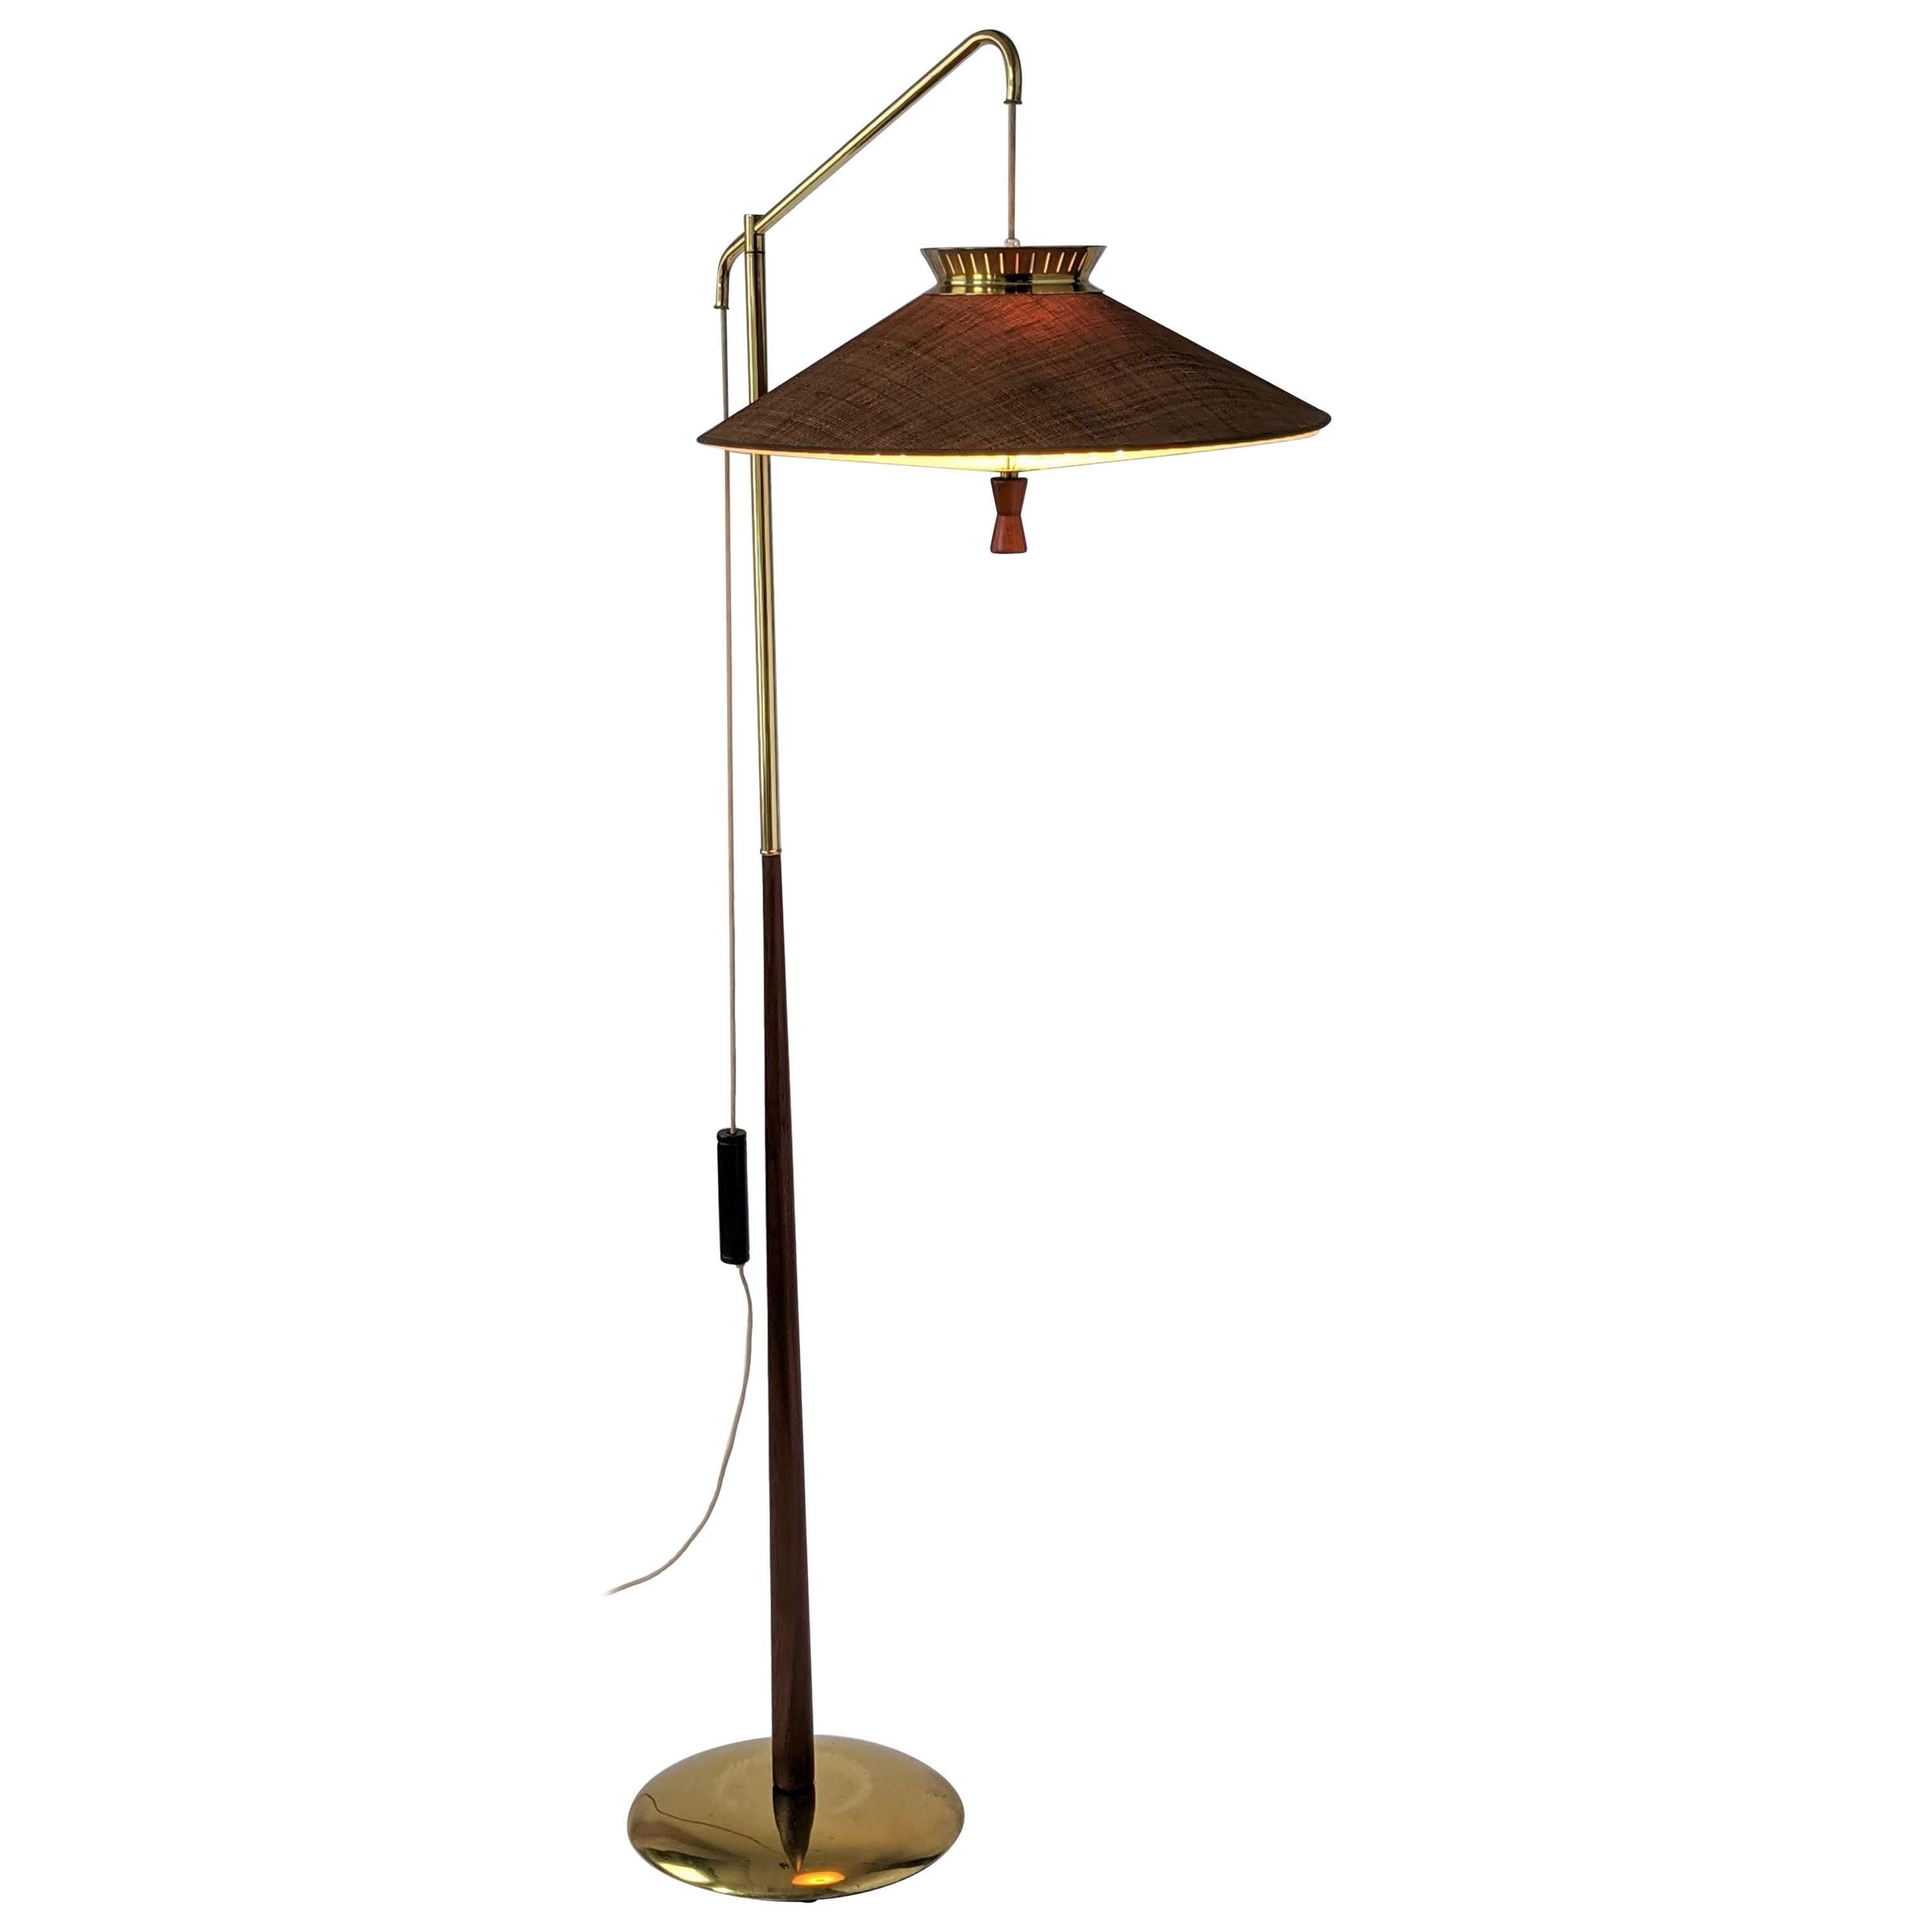 Elegant, bold floor lamp with a lot of personality and presence.

Solid well made construction. 

The counterweight work perfectly, permitting easy shade height adjustment from 59 in. to 29 in. from ground.

Asian inspired vented burlap shade